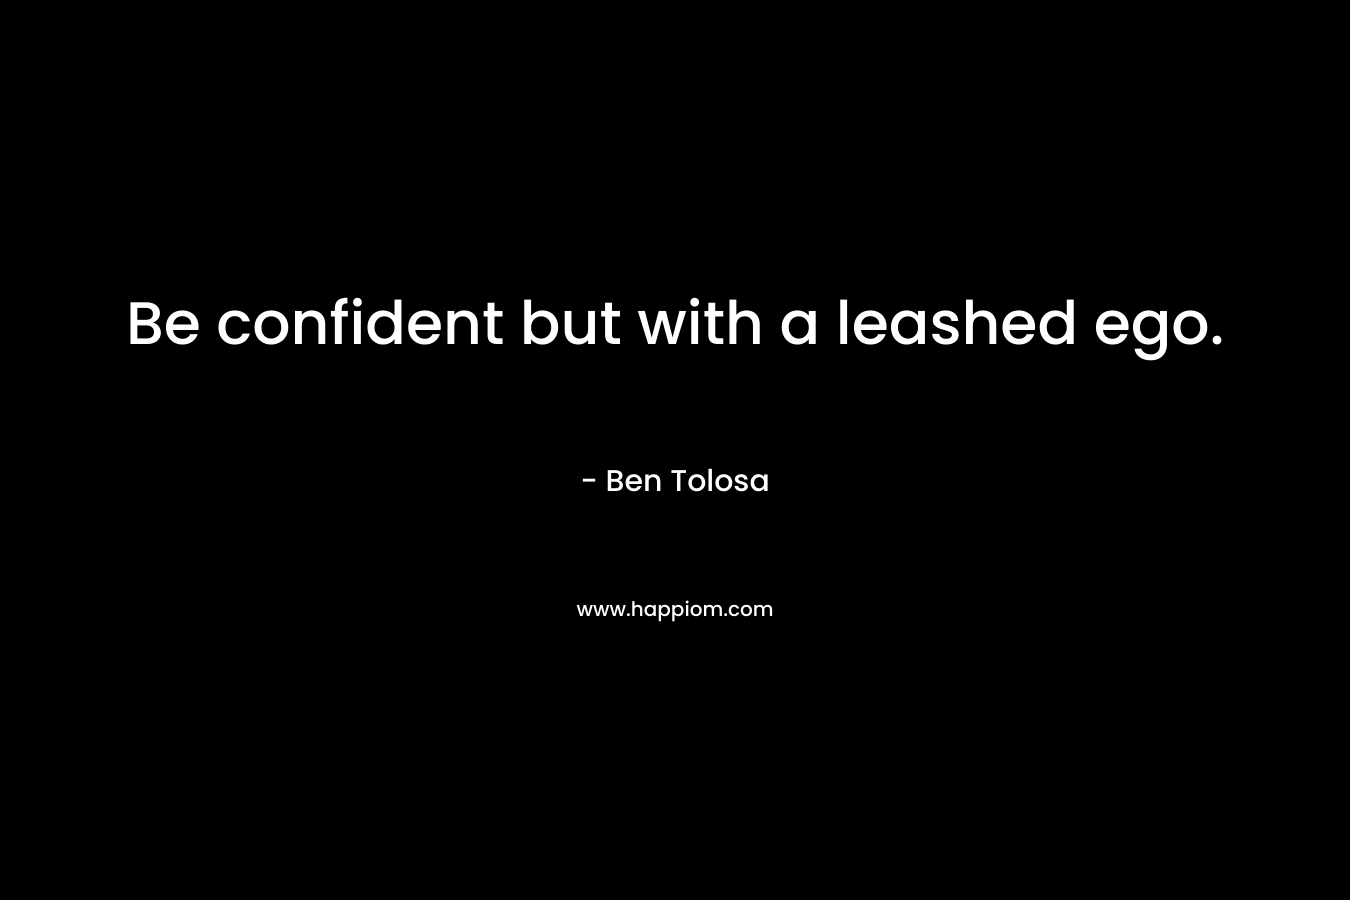 Be confident but with a leashed ego.